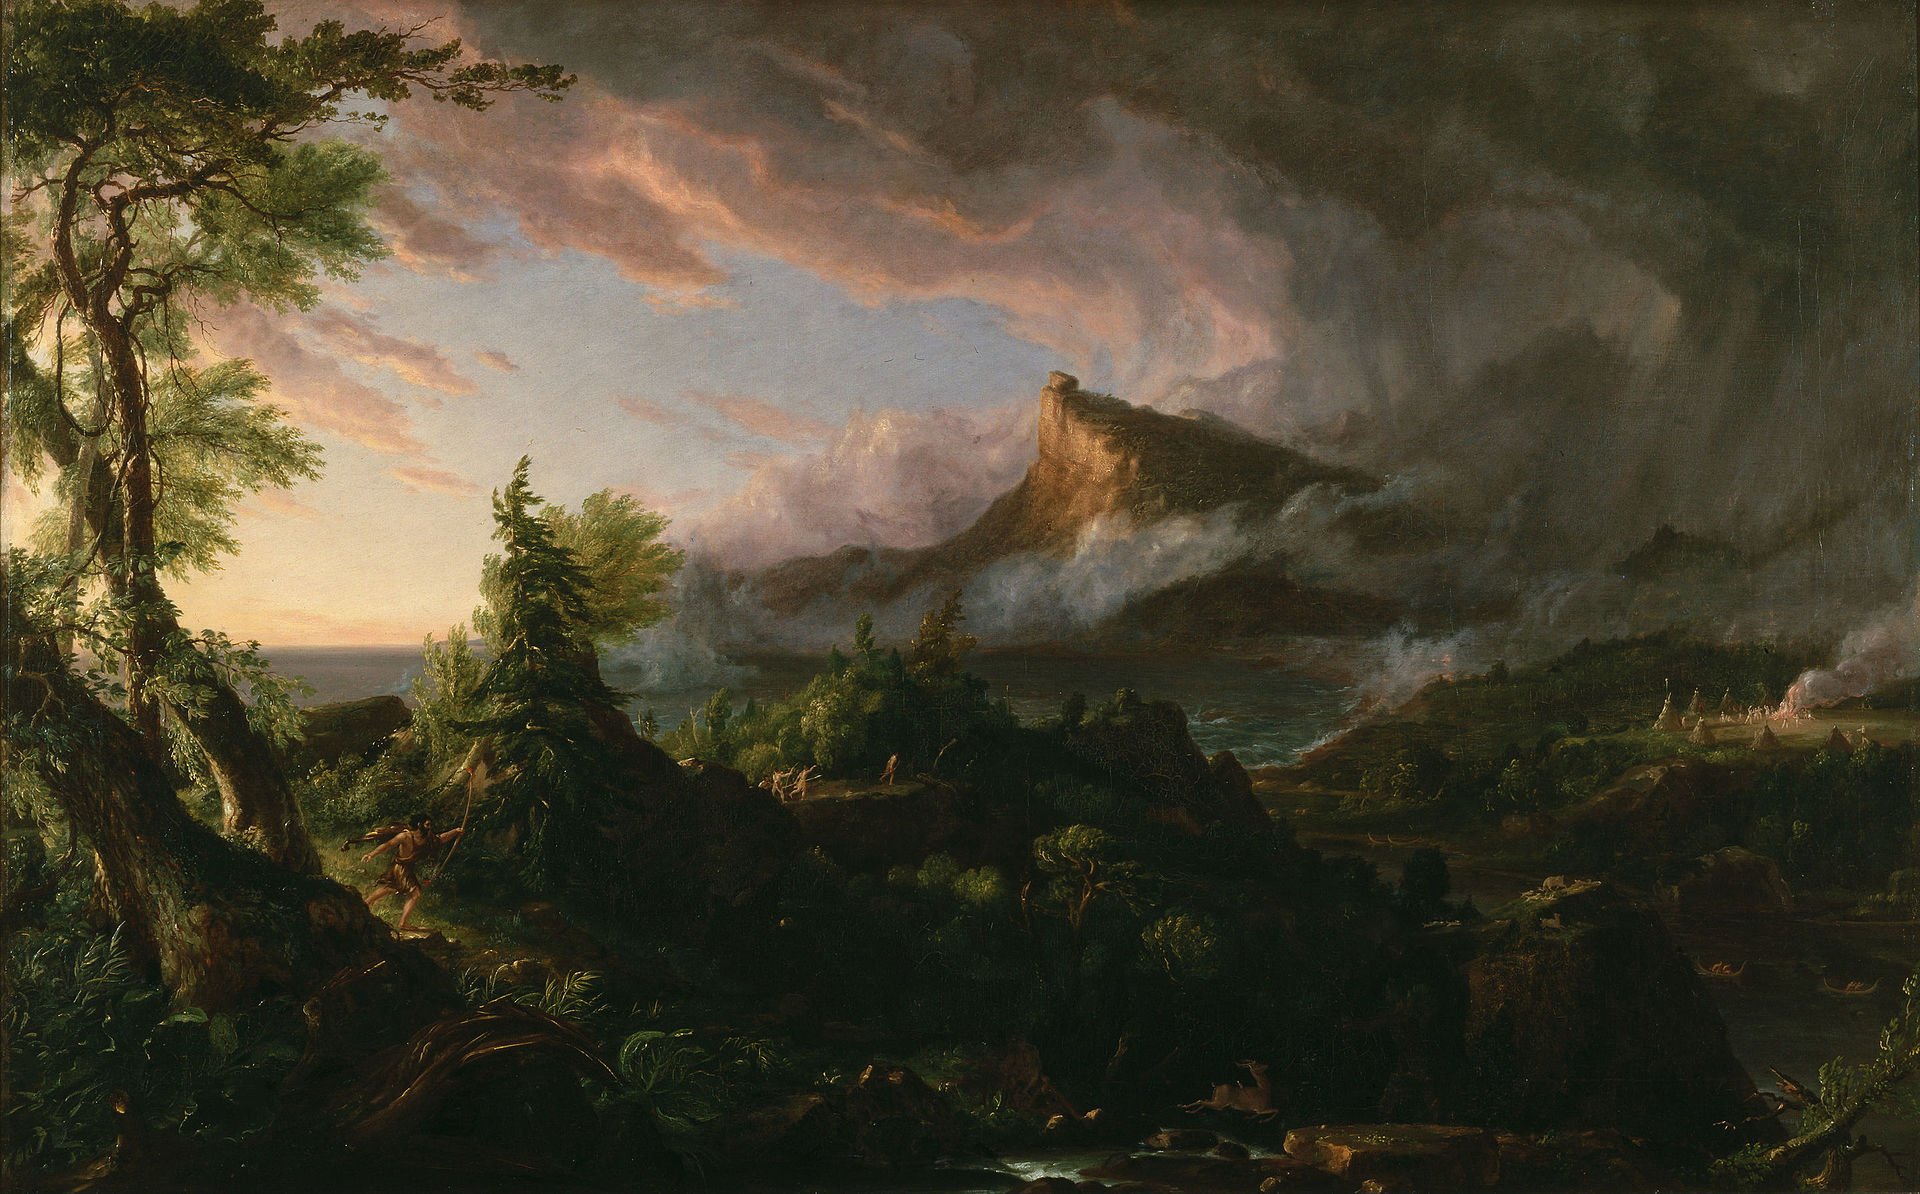 Thomas Cole, The Course of Empire. The Savage State, 1836